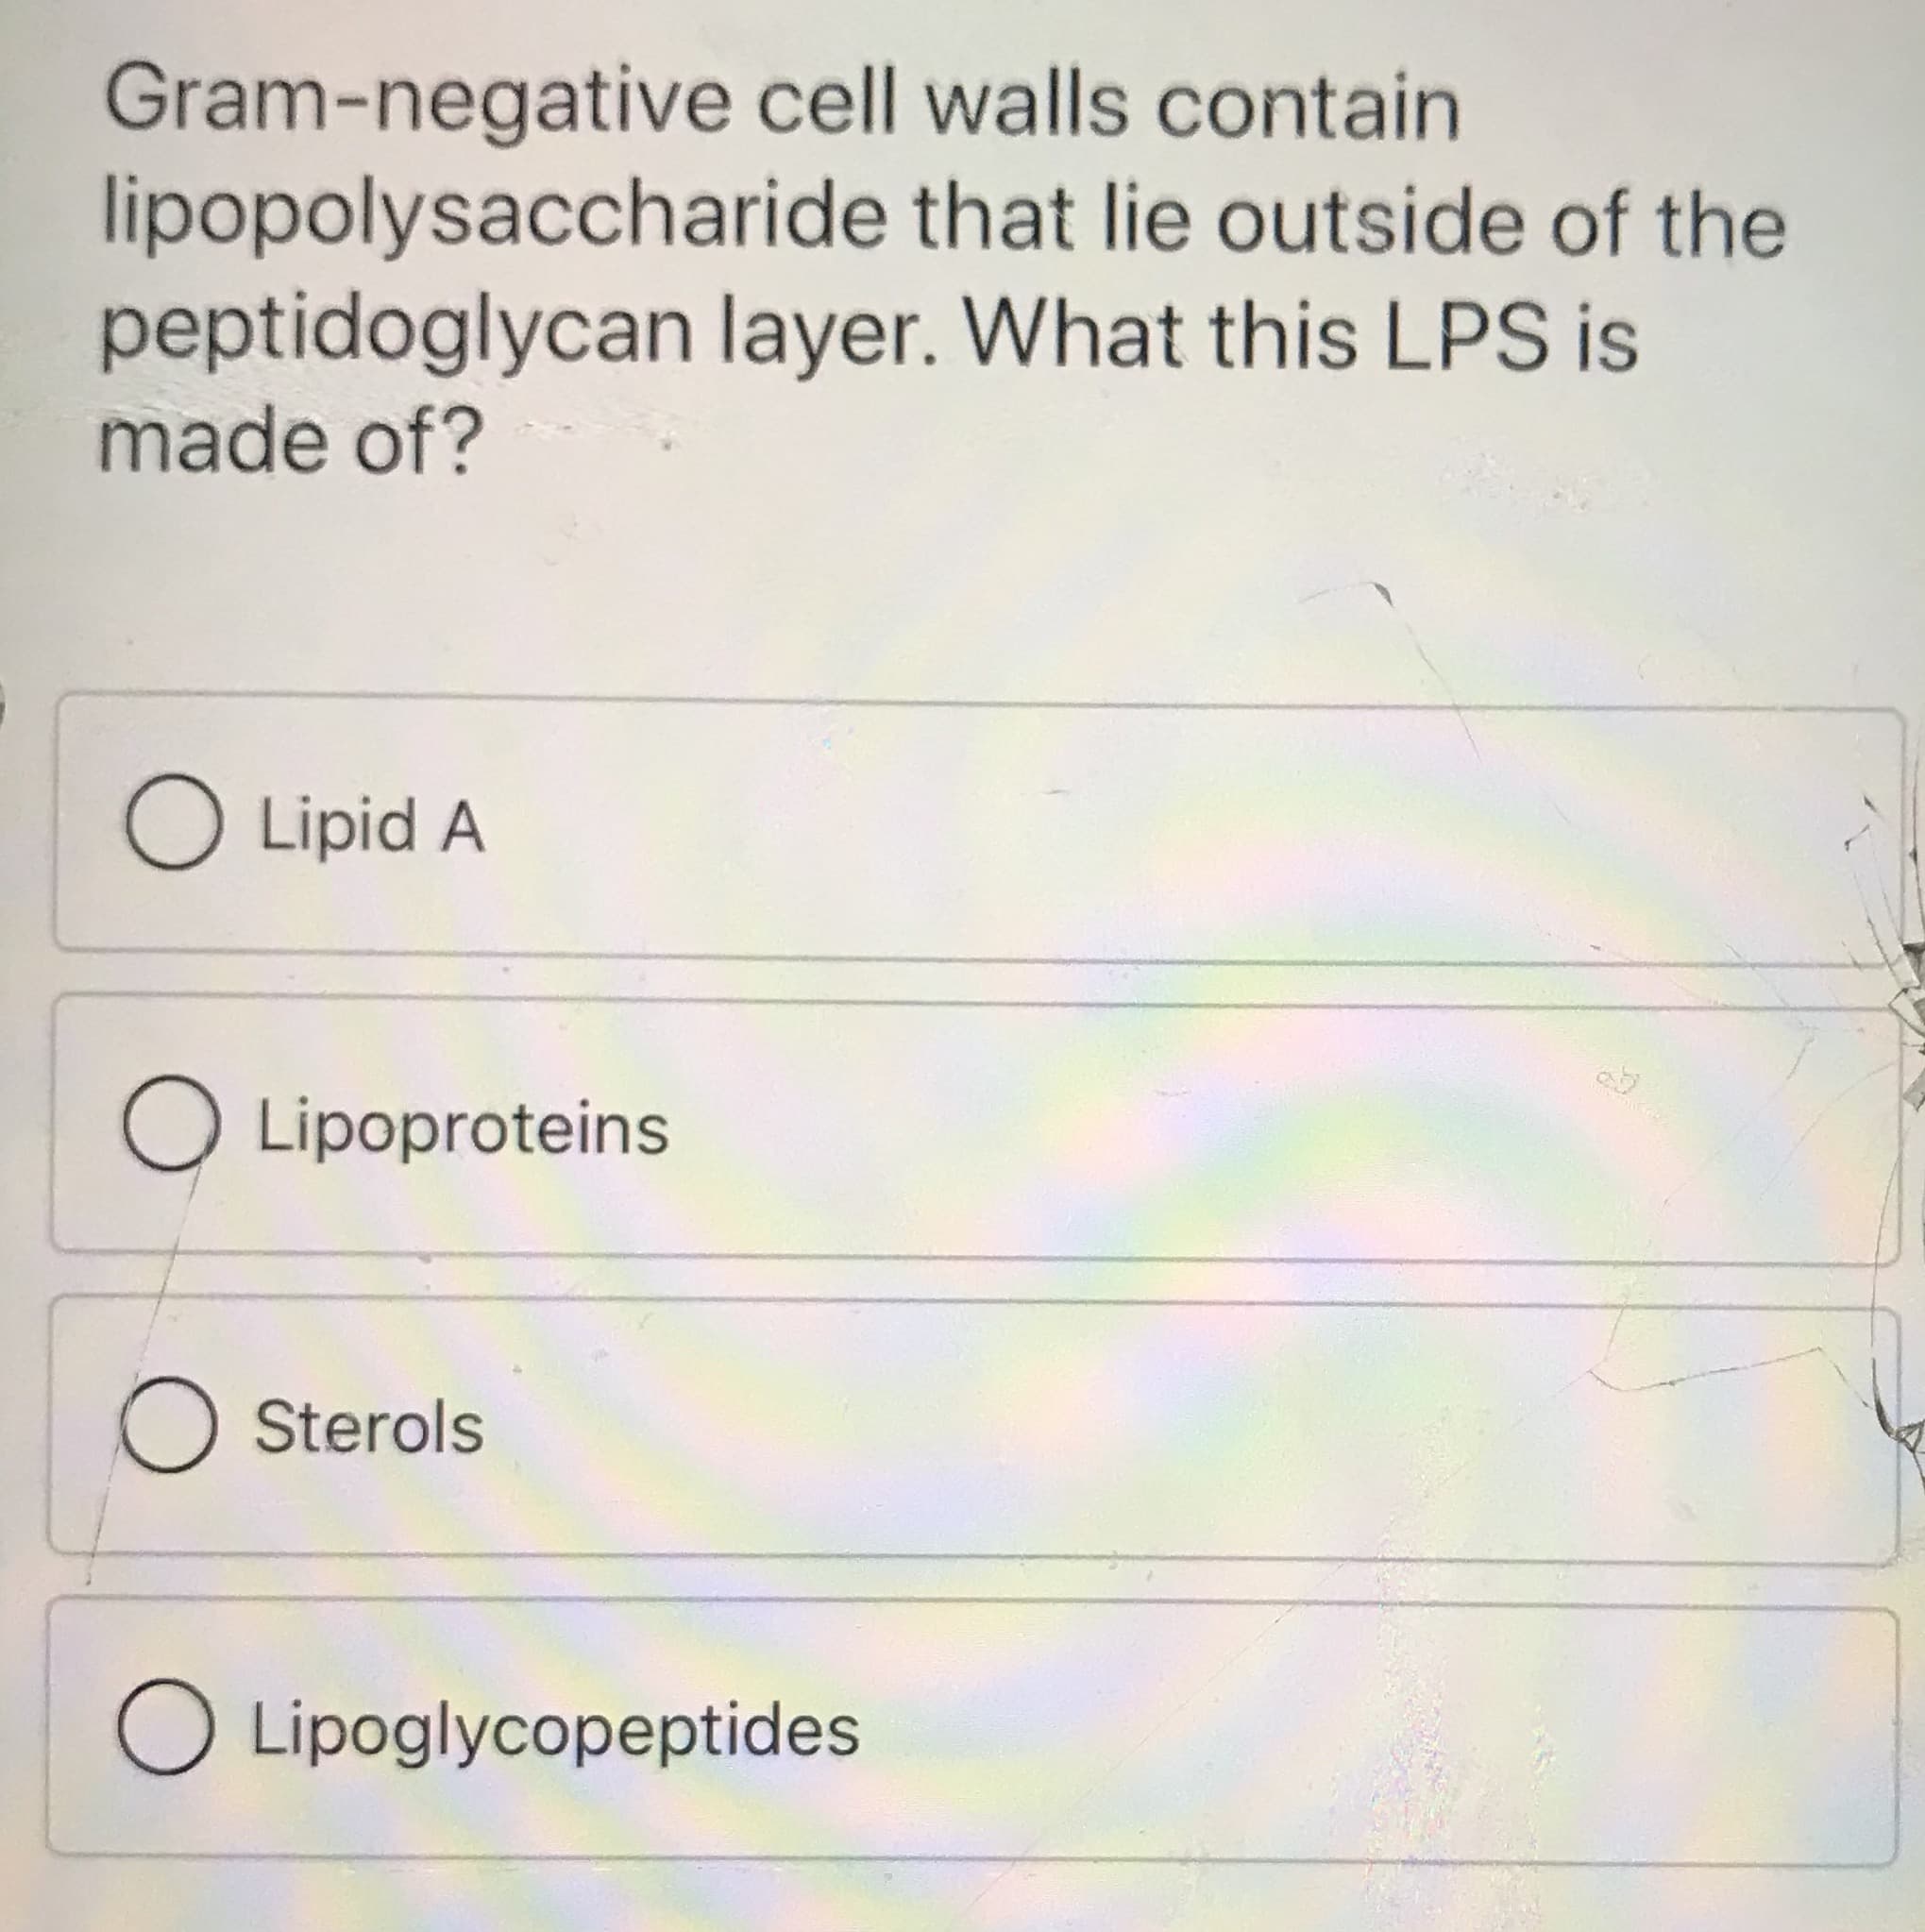 Gram-negative cell walls contain
lipopolysaccharide that lie outside of the
peptidoglycan layer. What this LPS is
made of?
